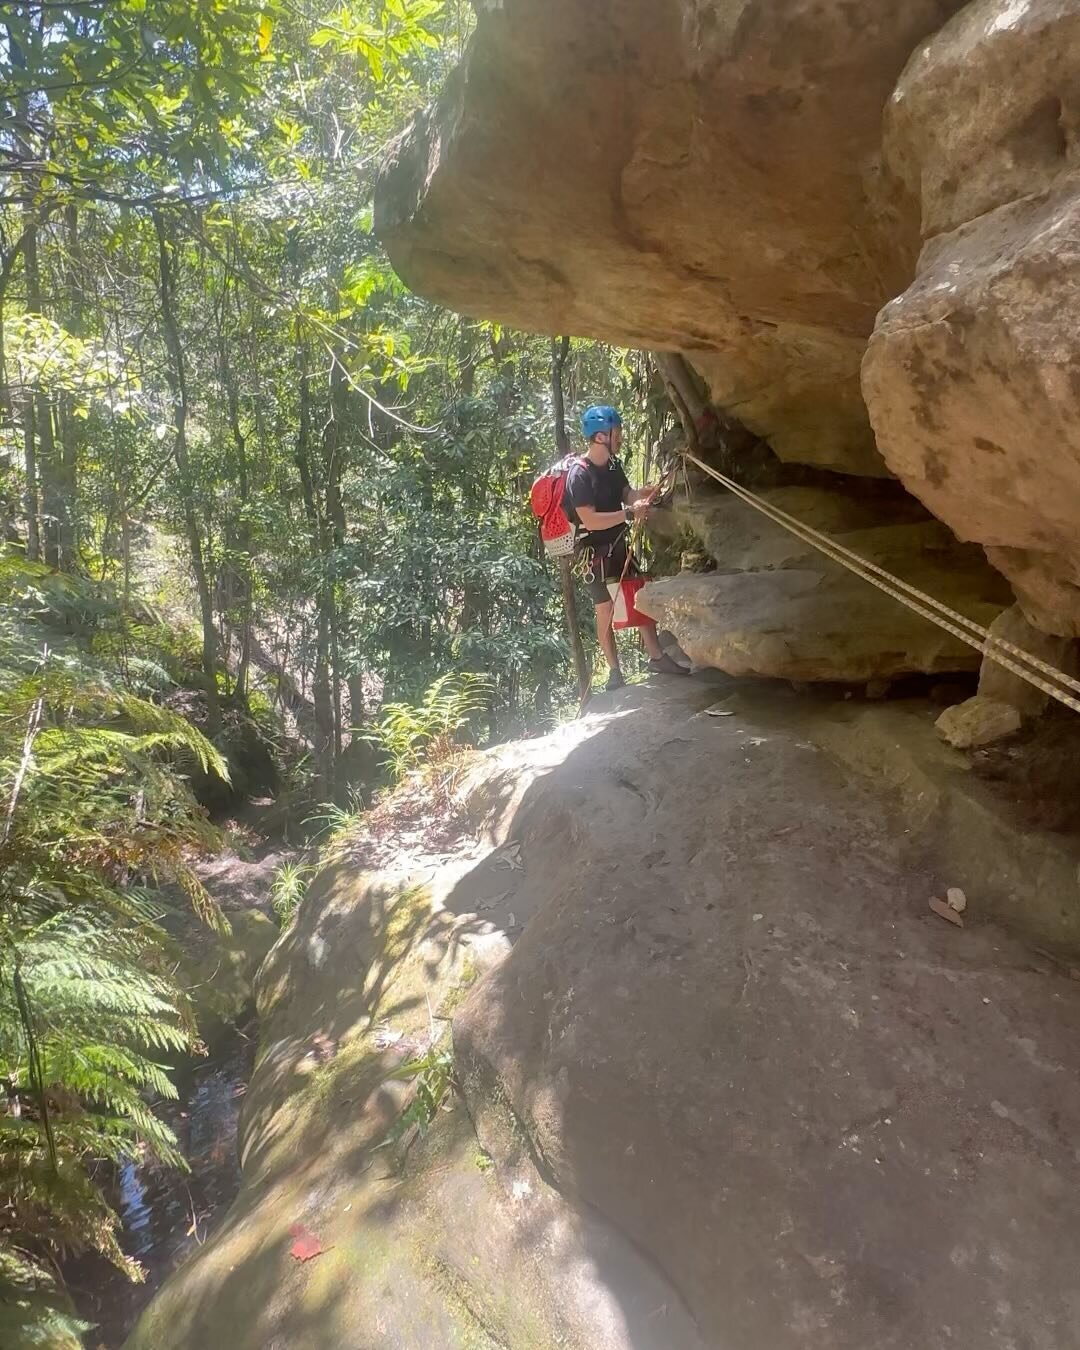 There are lots of anchors for retrievable traverse lines in the Blue Mountains, most of them natural. If there was ever an efficient way to move a party through delicate terrain, this would be it. 

#canyoning #canyonisme #canyoningadventure #canyoni